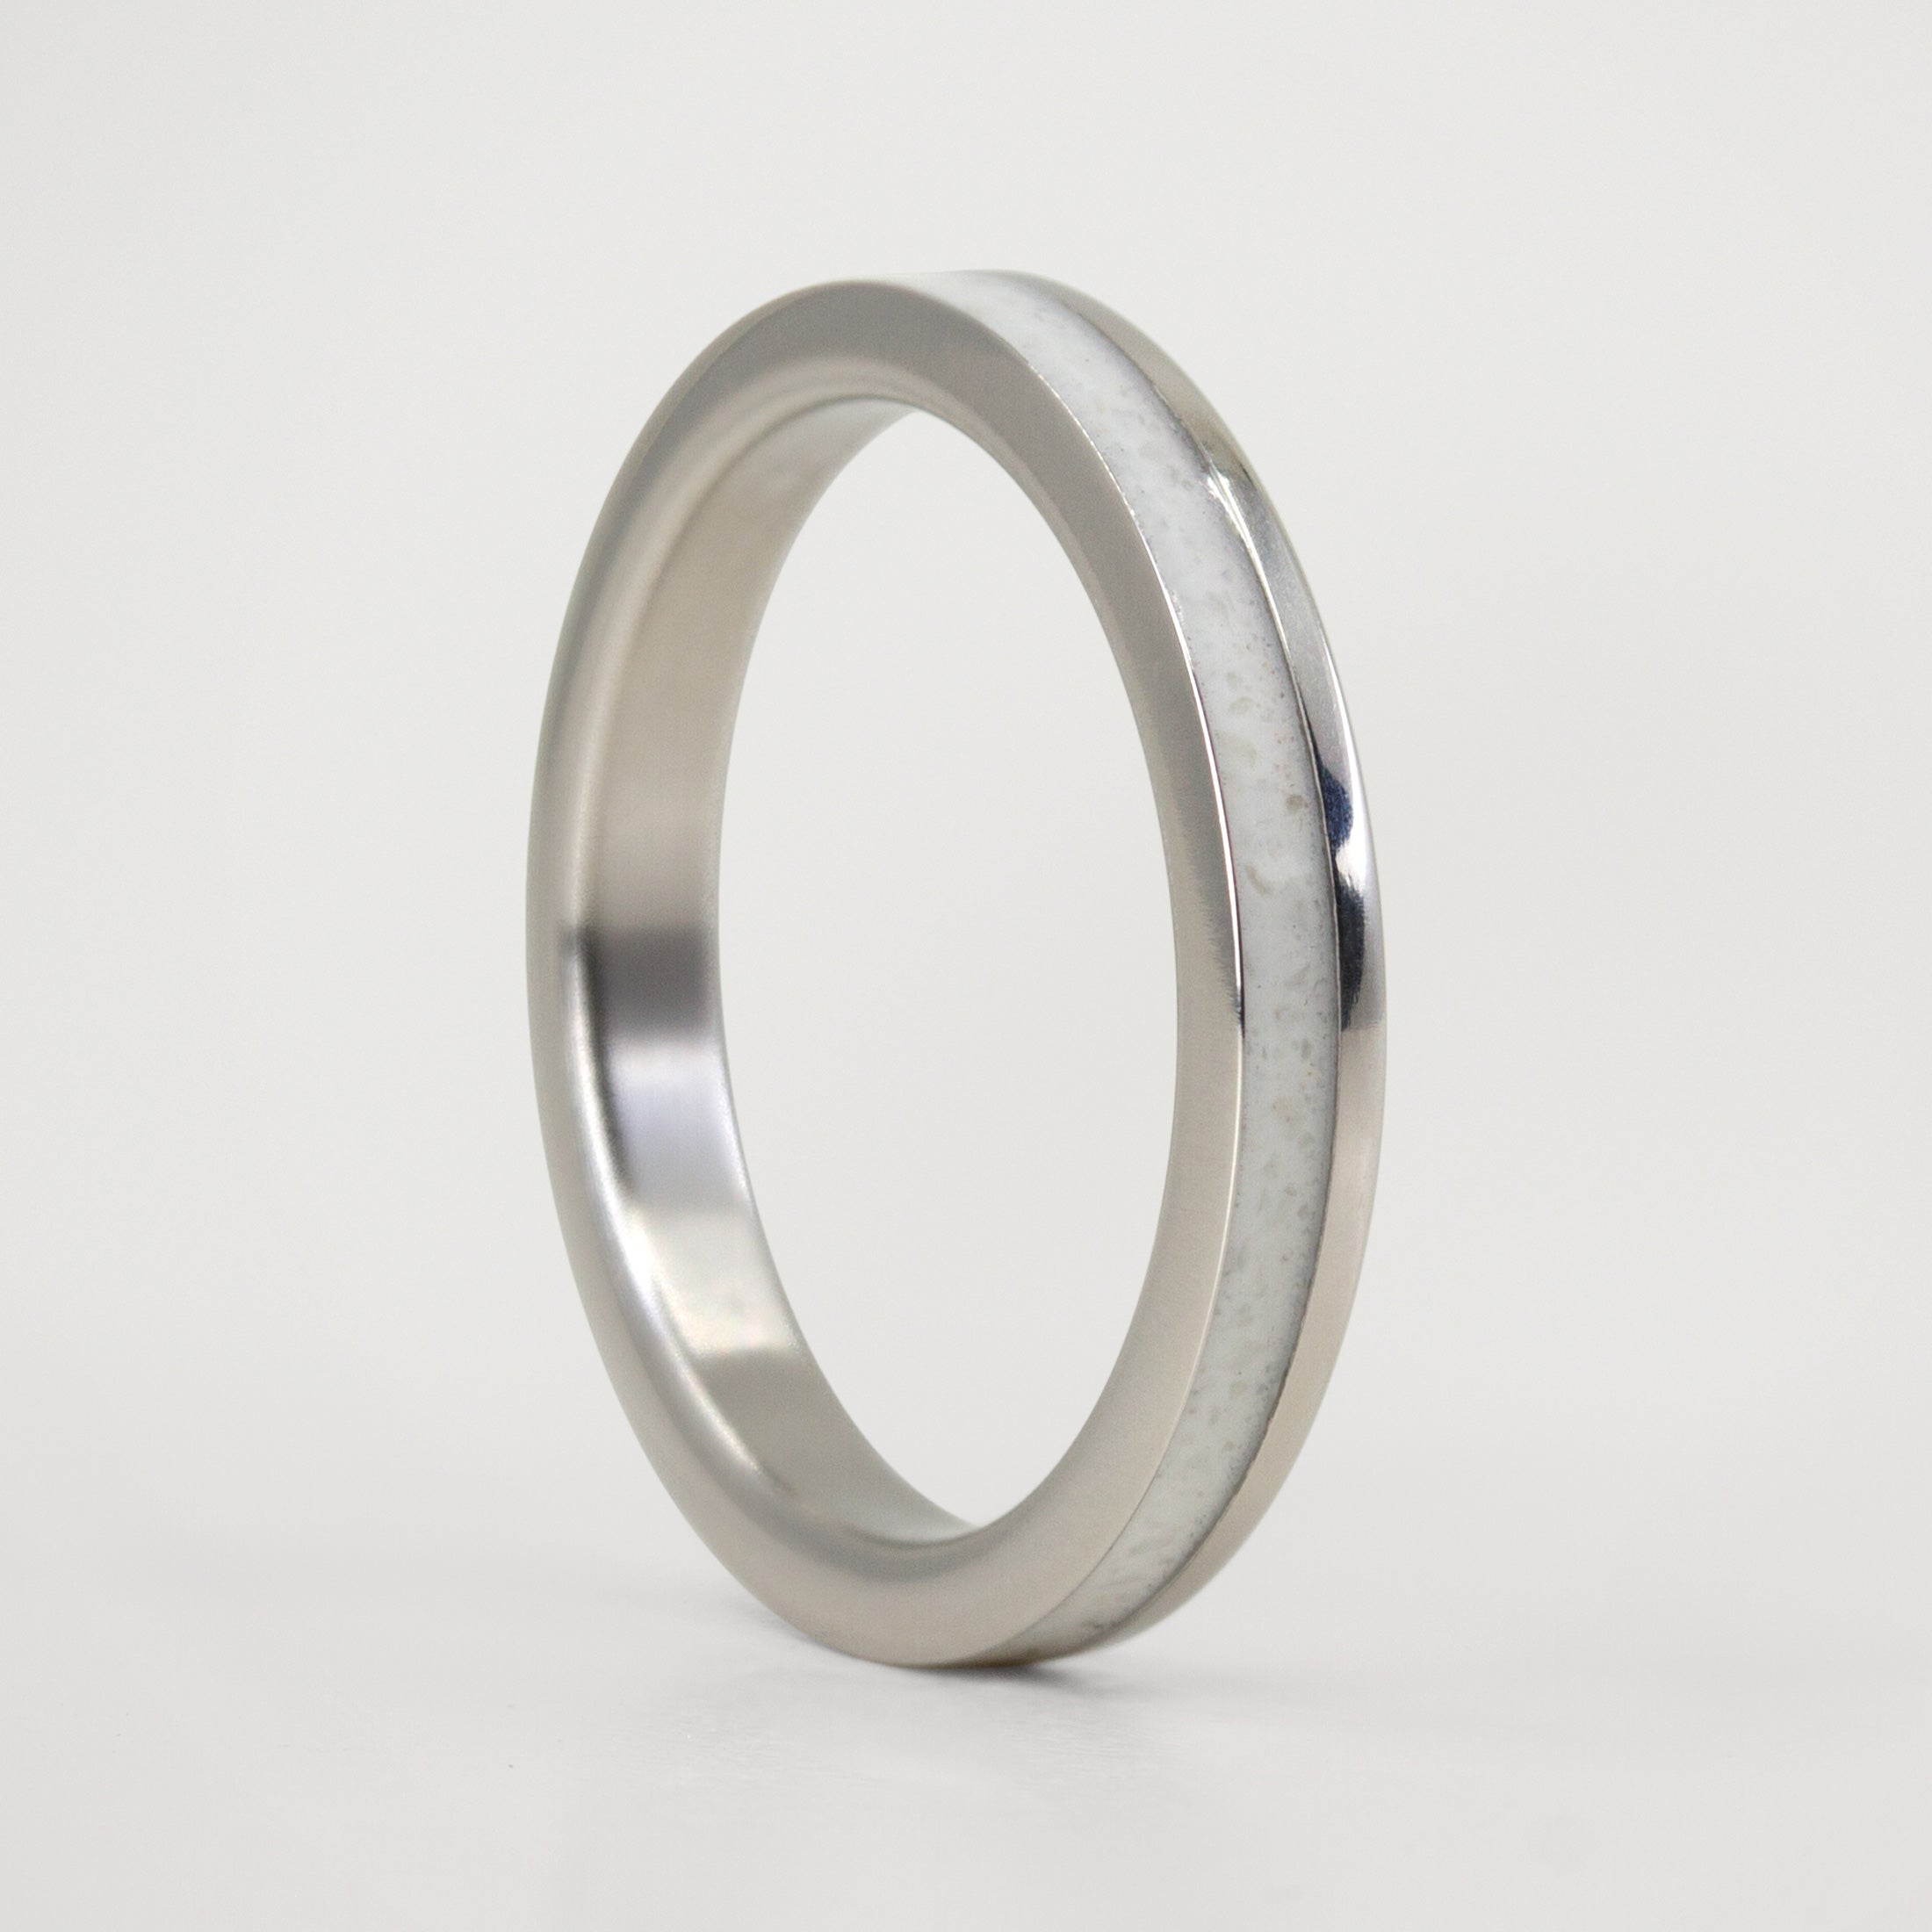 Carrara marble and offset polished titanium Ring